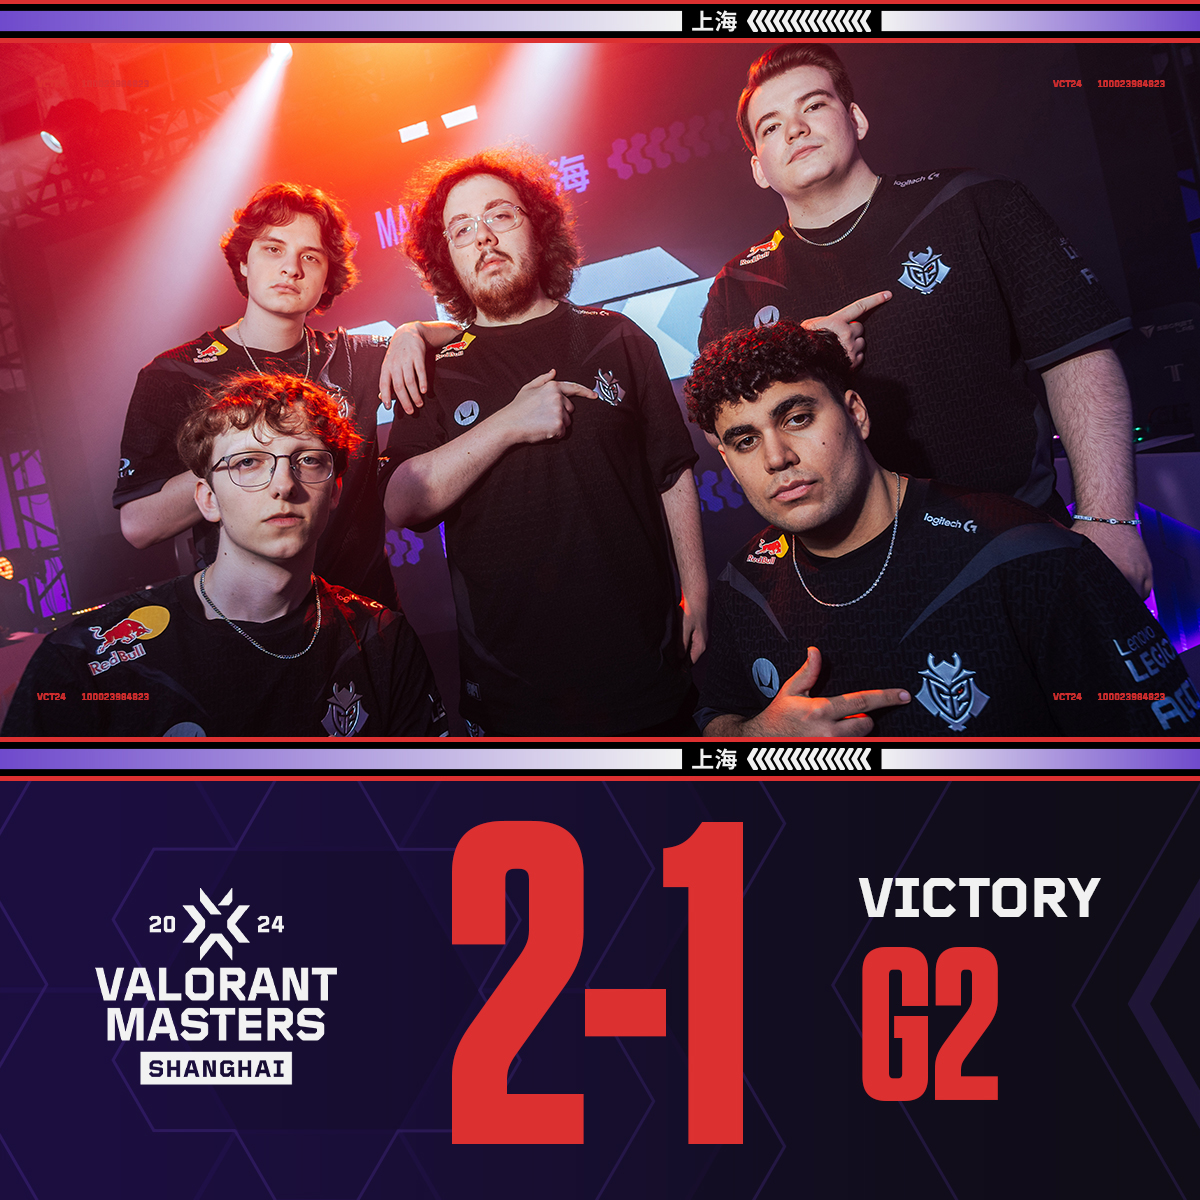 What a comeback from G2! 🙌 They take Lotus in overtime and secure the series win. #VALORANTMasters